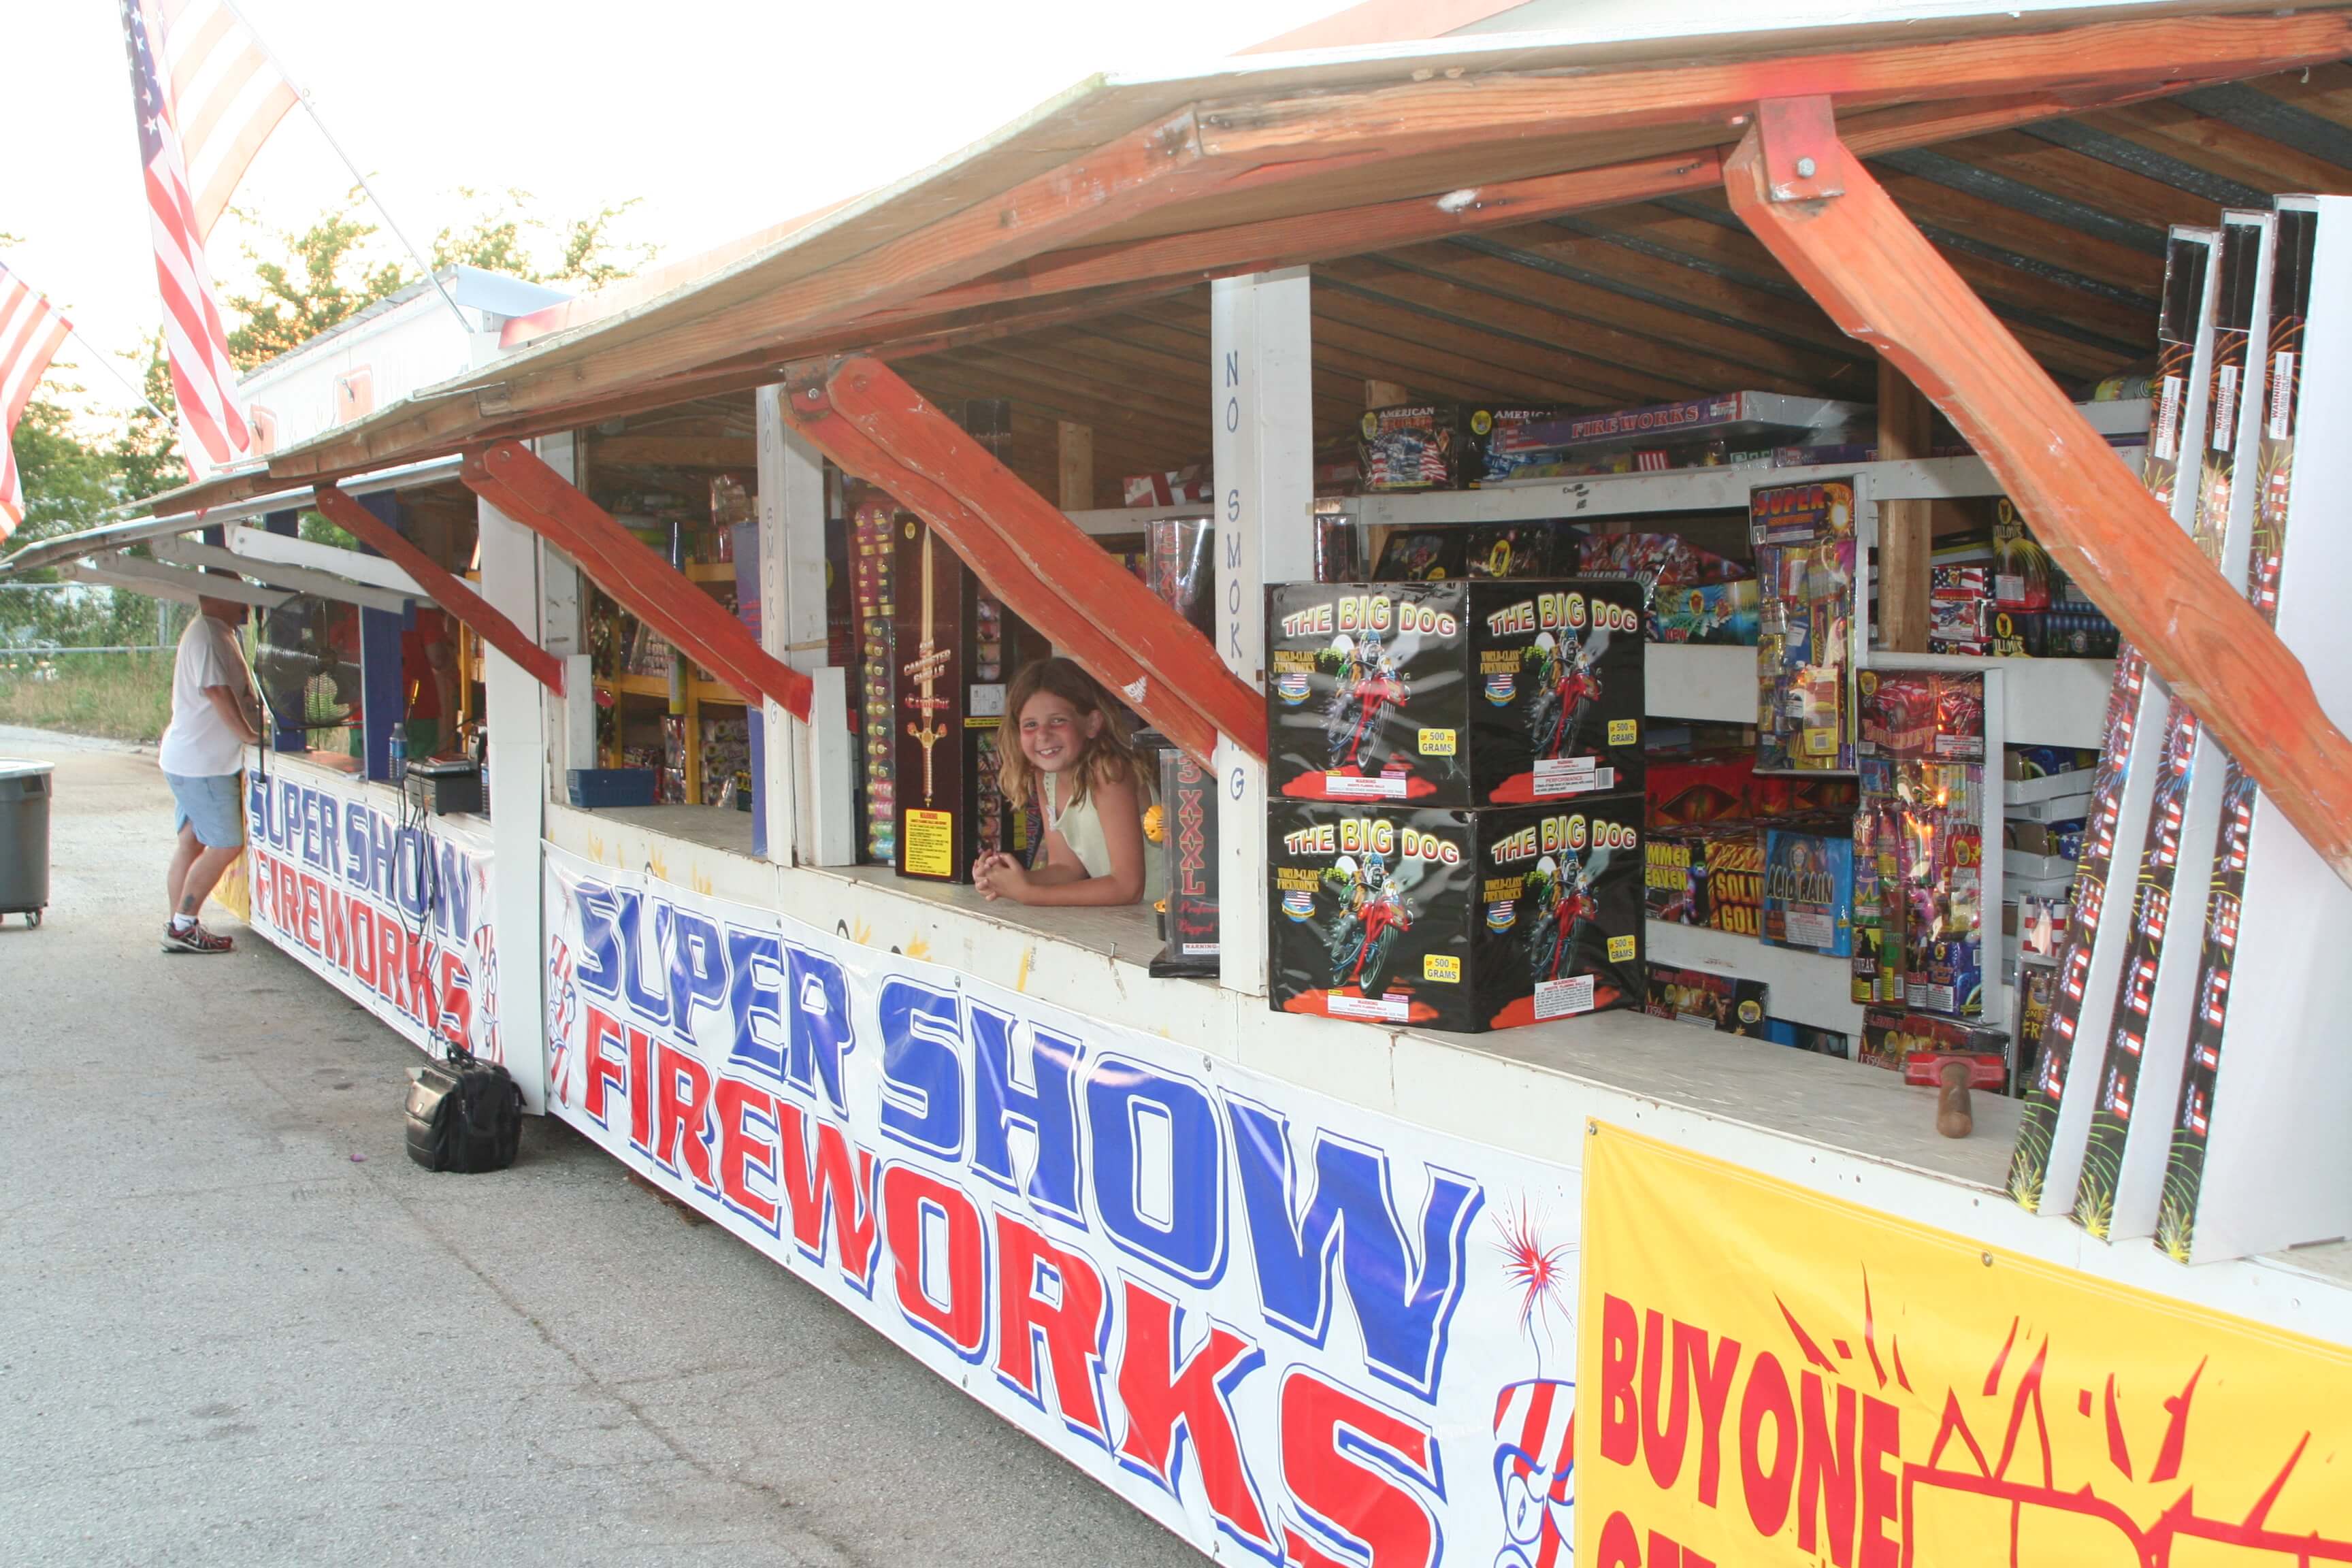 Girl at fireworks stand